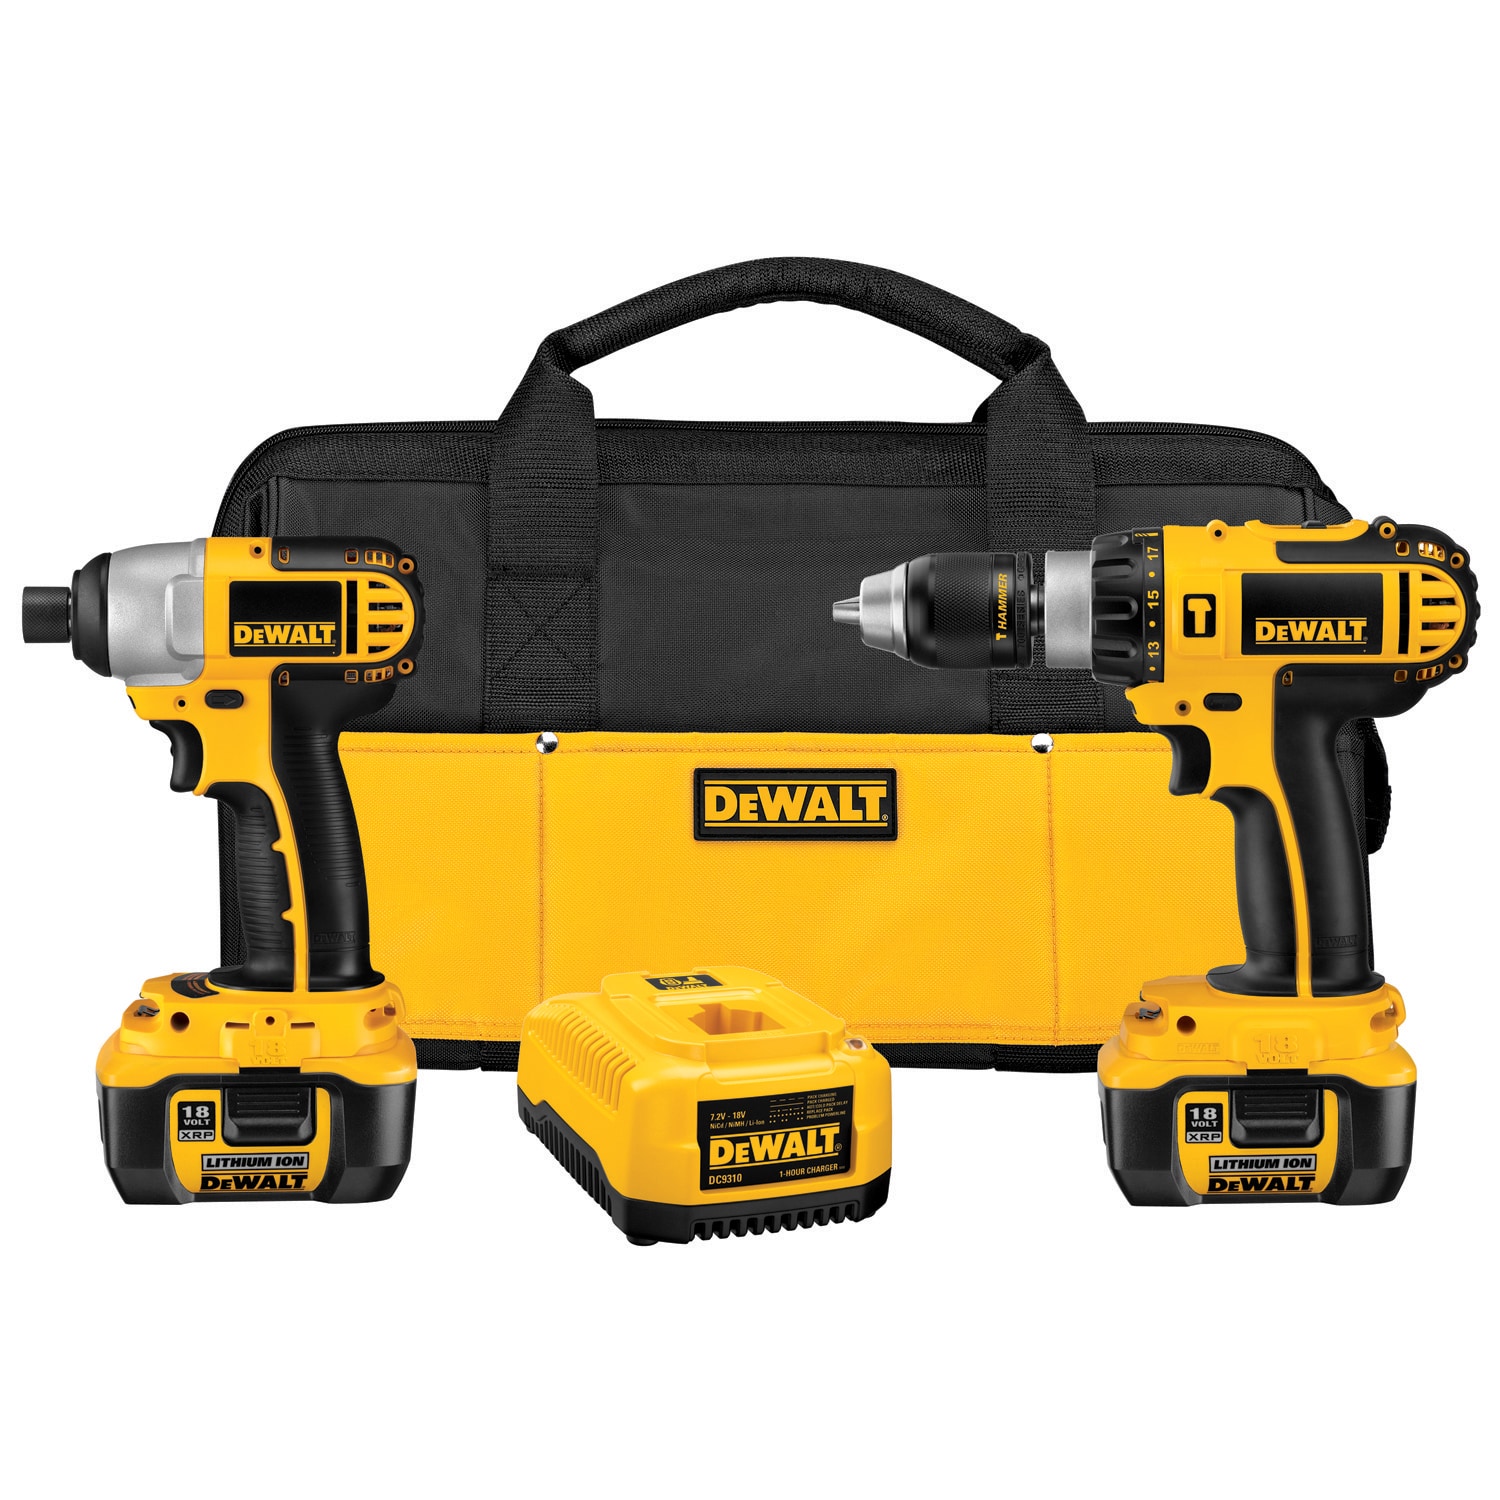 DEWALT Power Tool Combo Kit with Soft Case (2-Batteries charger Included) at